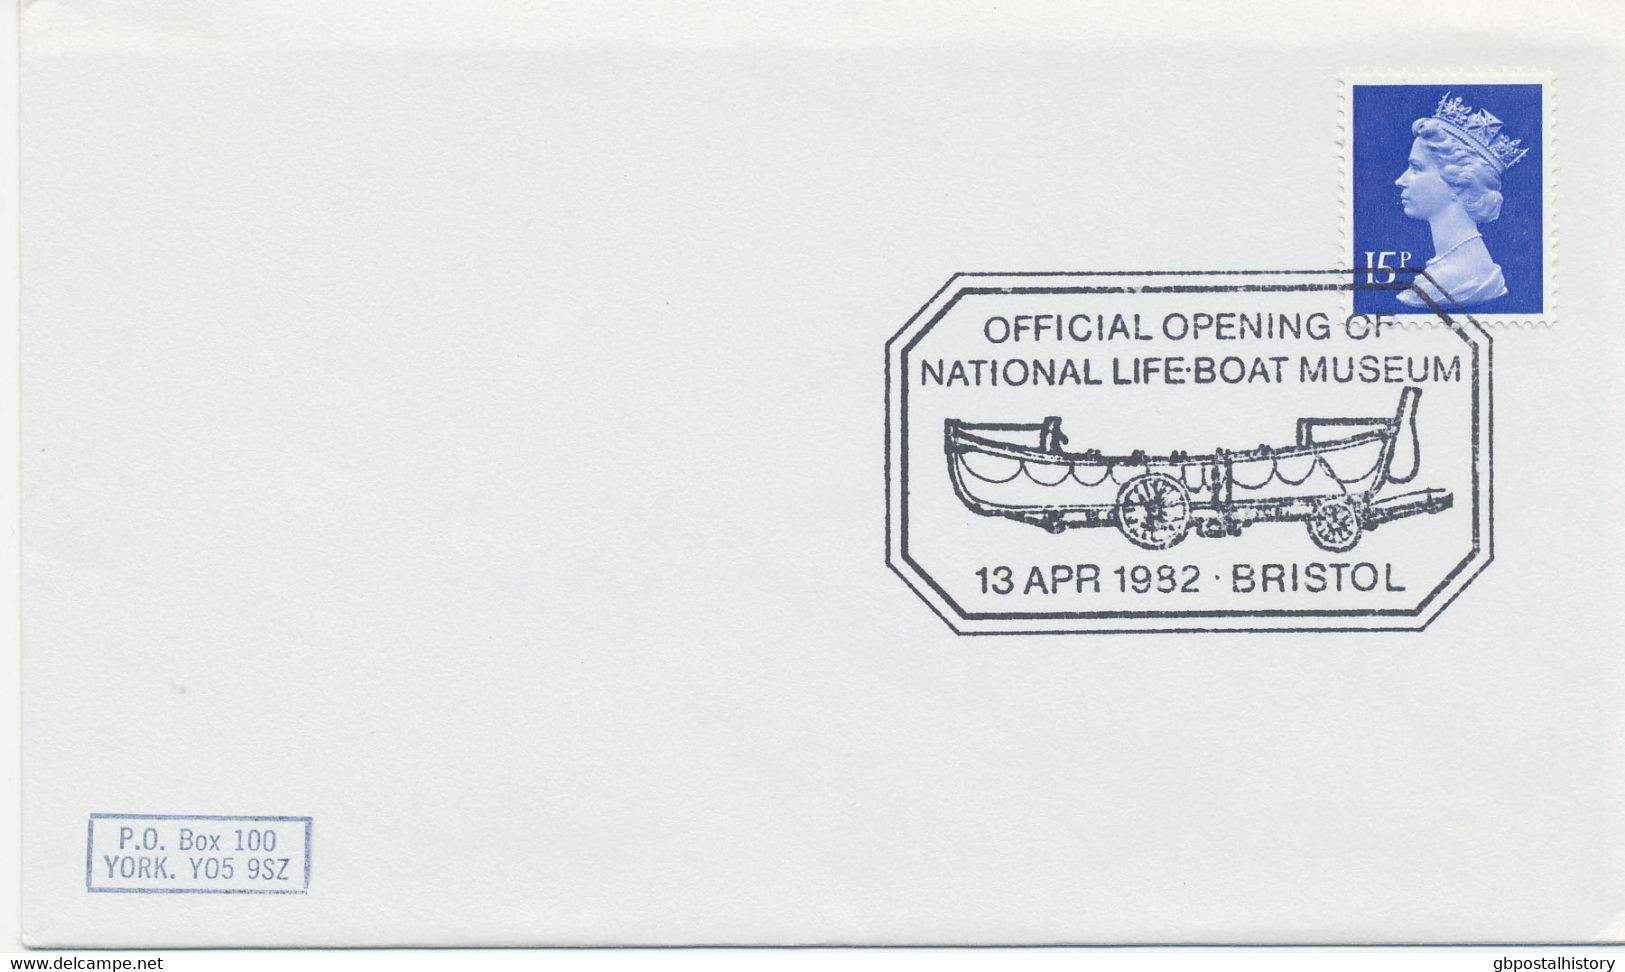 GB SPECIAL EVENT POSTMARKS OFFICIAL OPENING OF NATIONAL LIFE-BOAT MUSEUM 13 APR 1982 - BRISTOL - Marcophilie